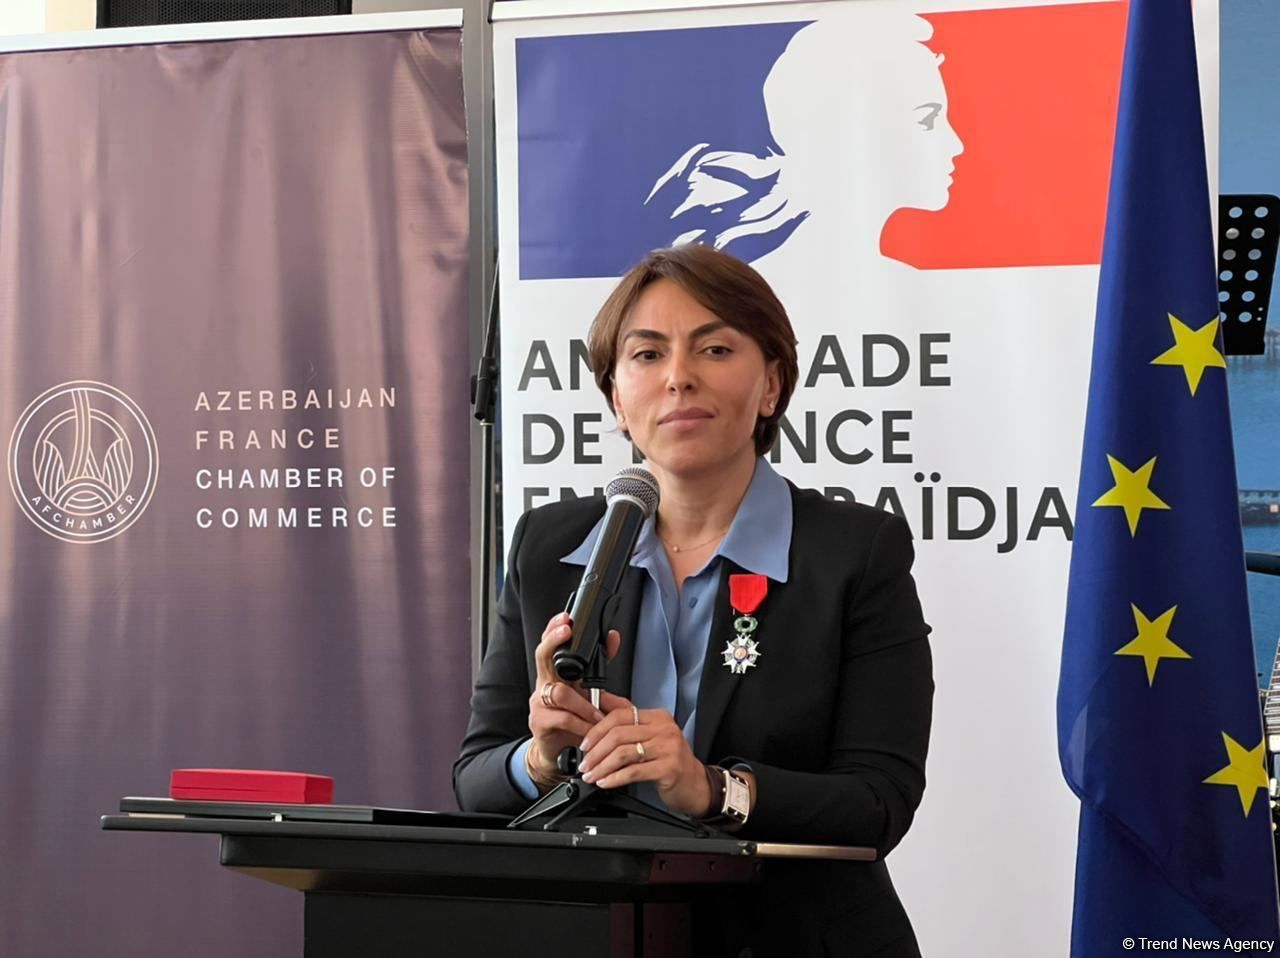 Chamber of Commerce chair emphasizes significance of France's partnership with Azerbaijan